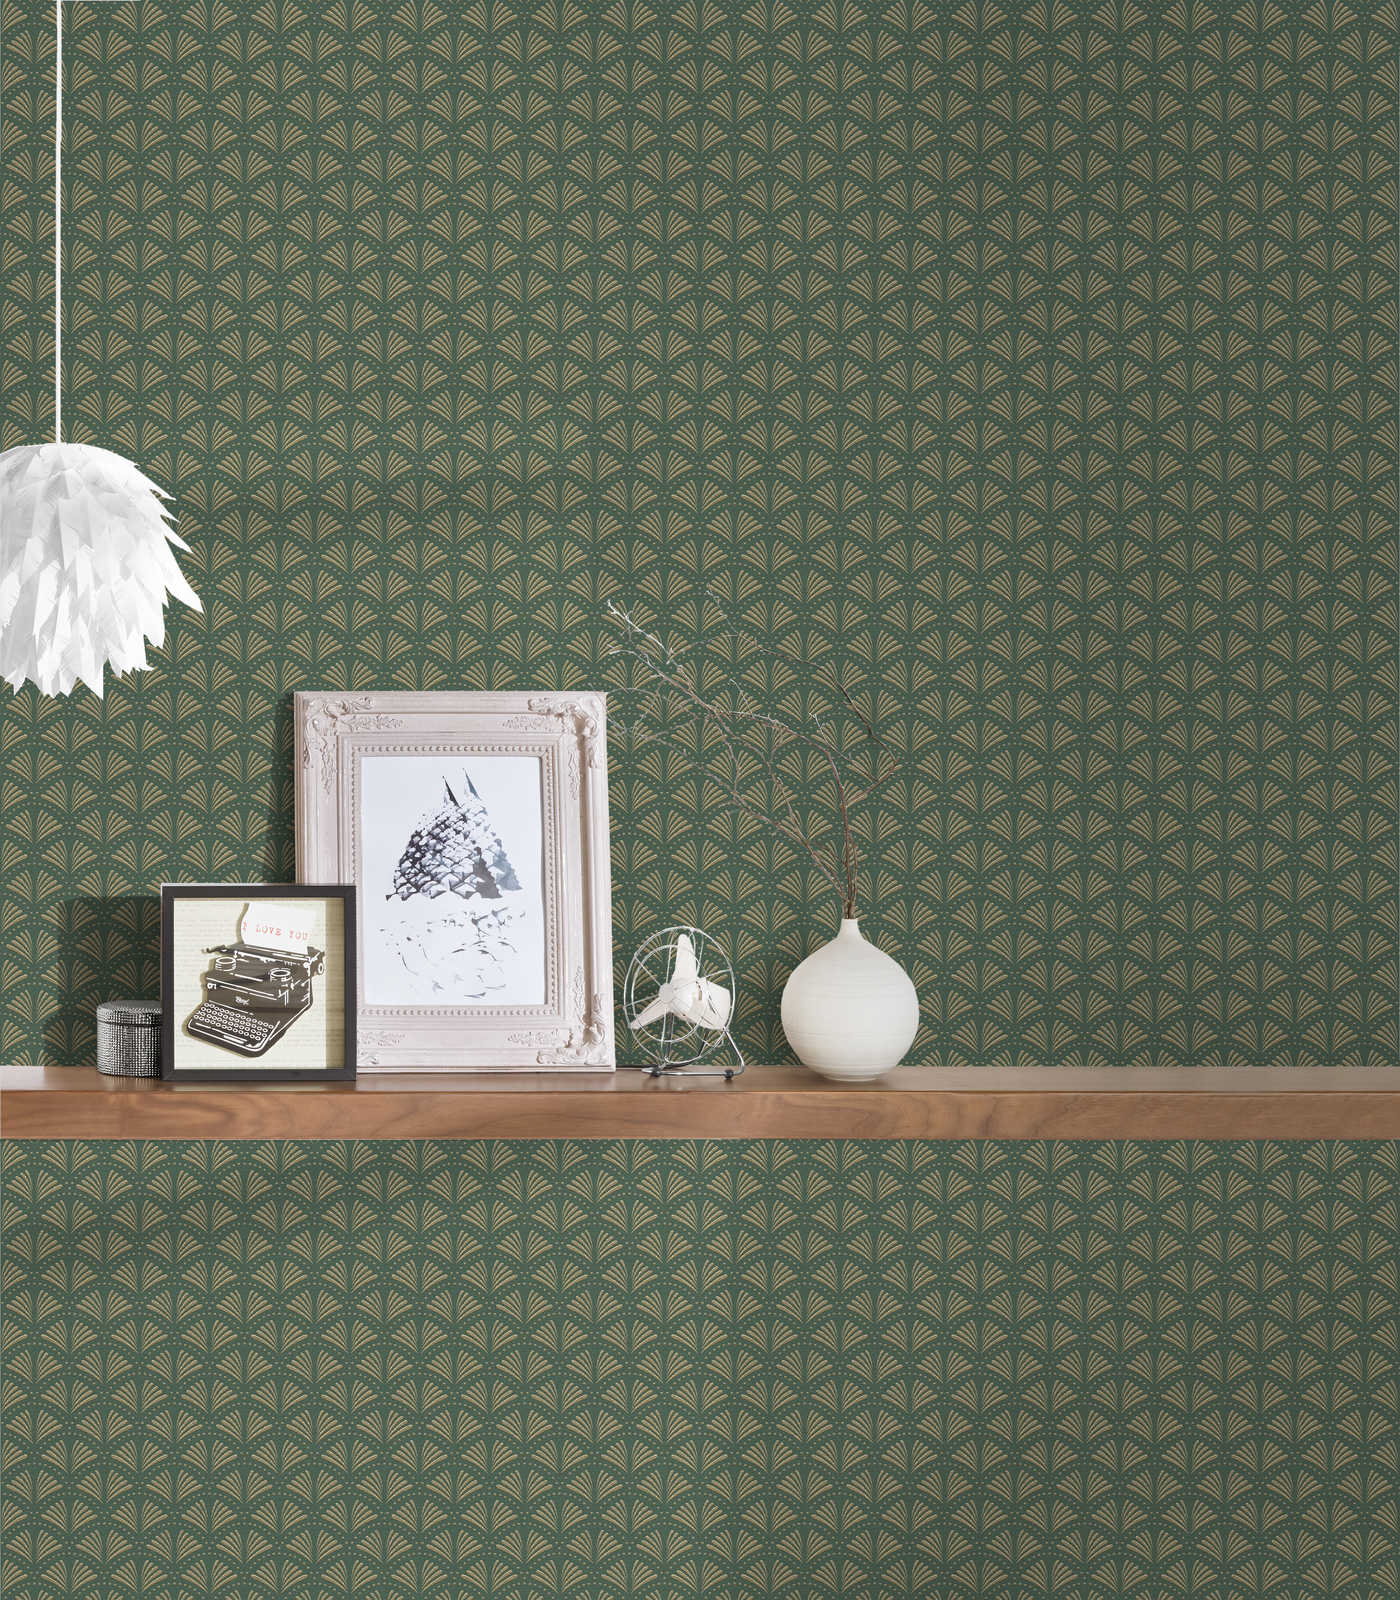             Wallpaper green & gold with Art Deco pattern and metallic effect
        